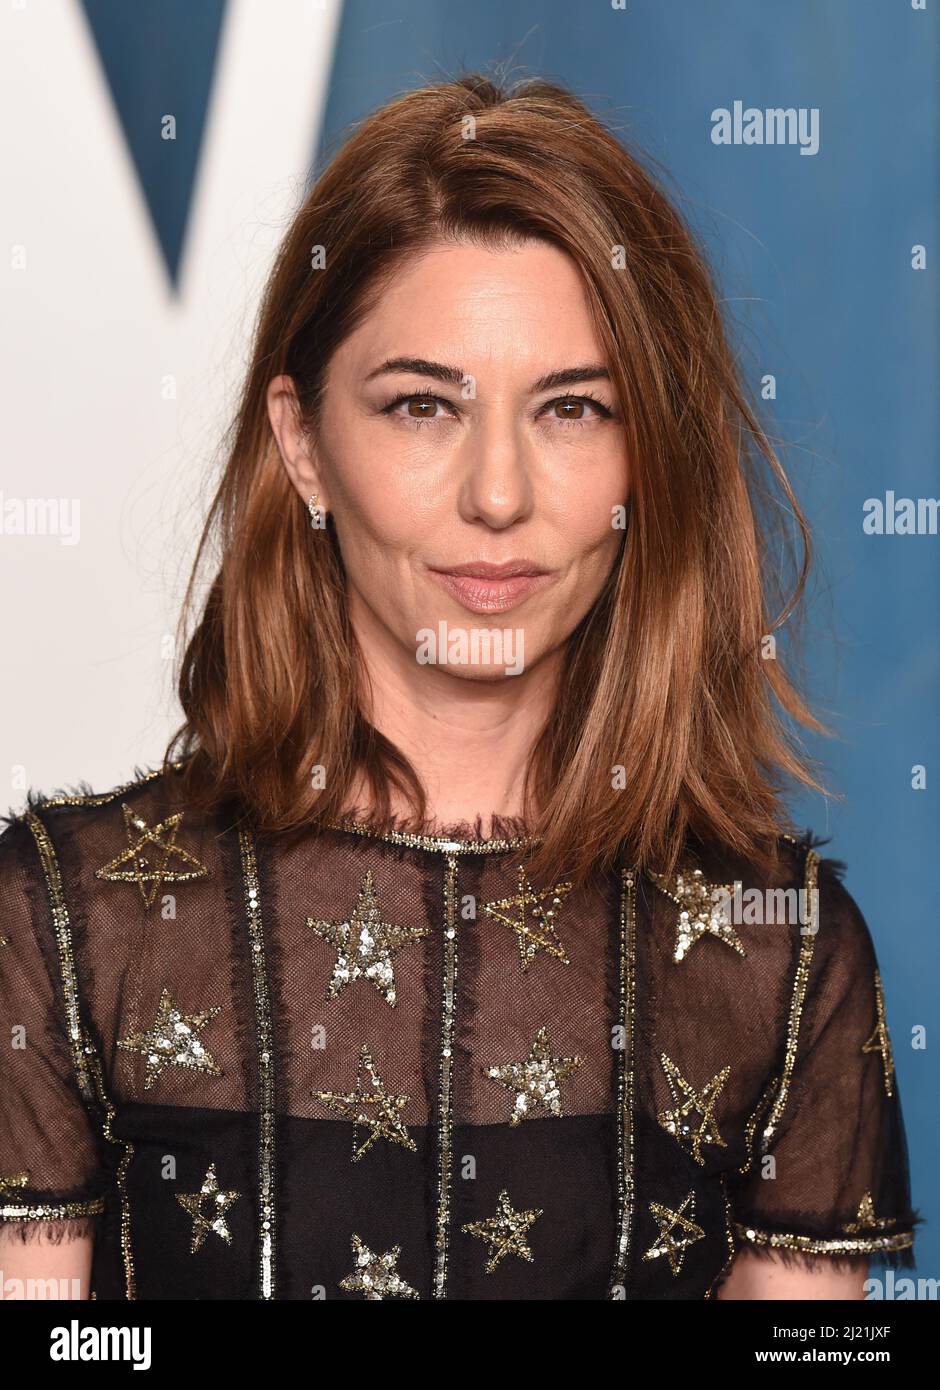 Photo: Sofia Coppola attends Vanity Fair Oscar Party in Beverly Hills -  LAP20220327878 